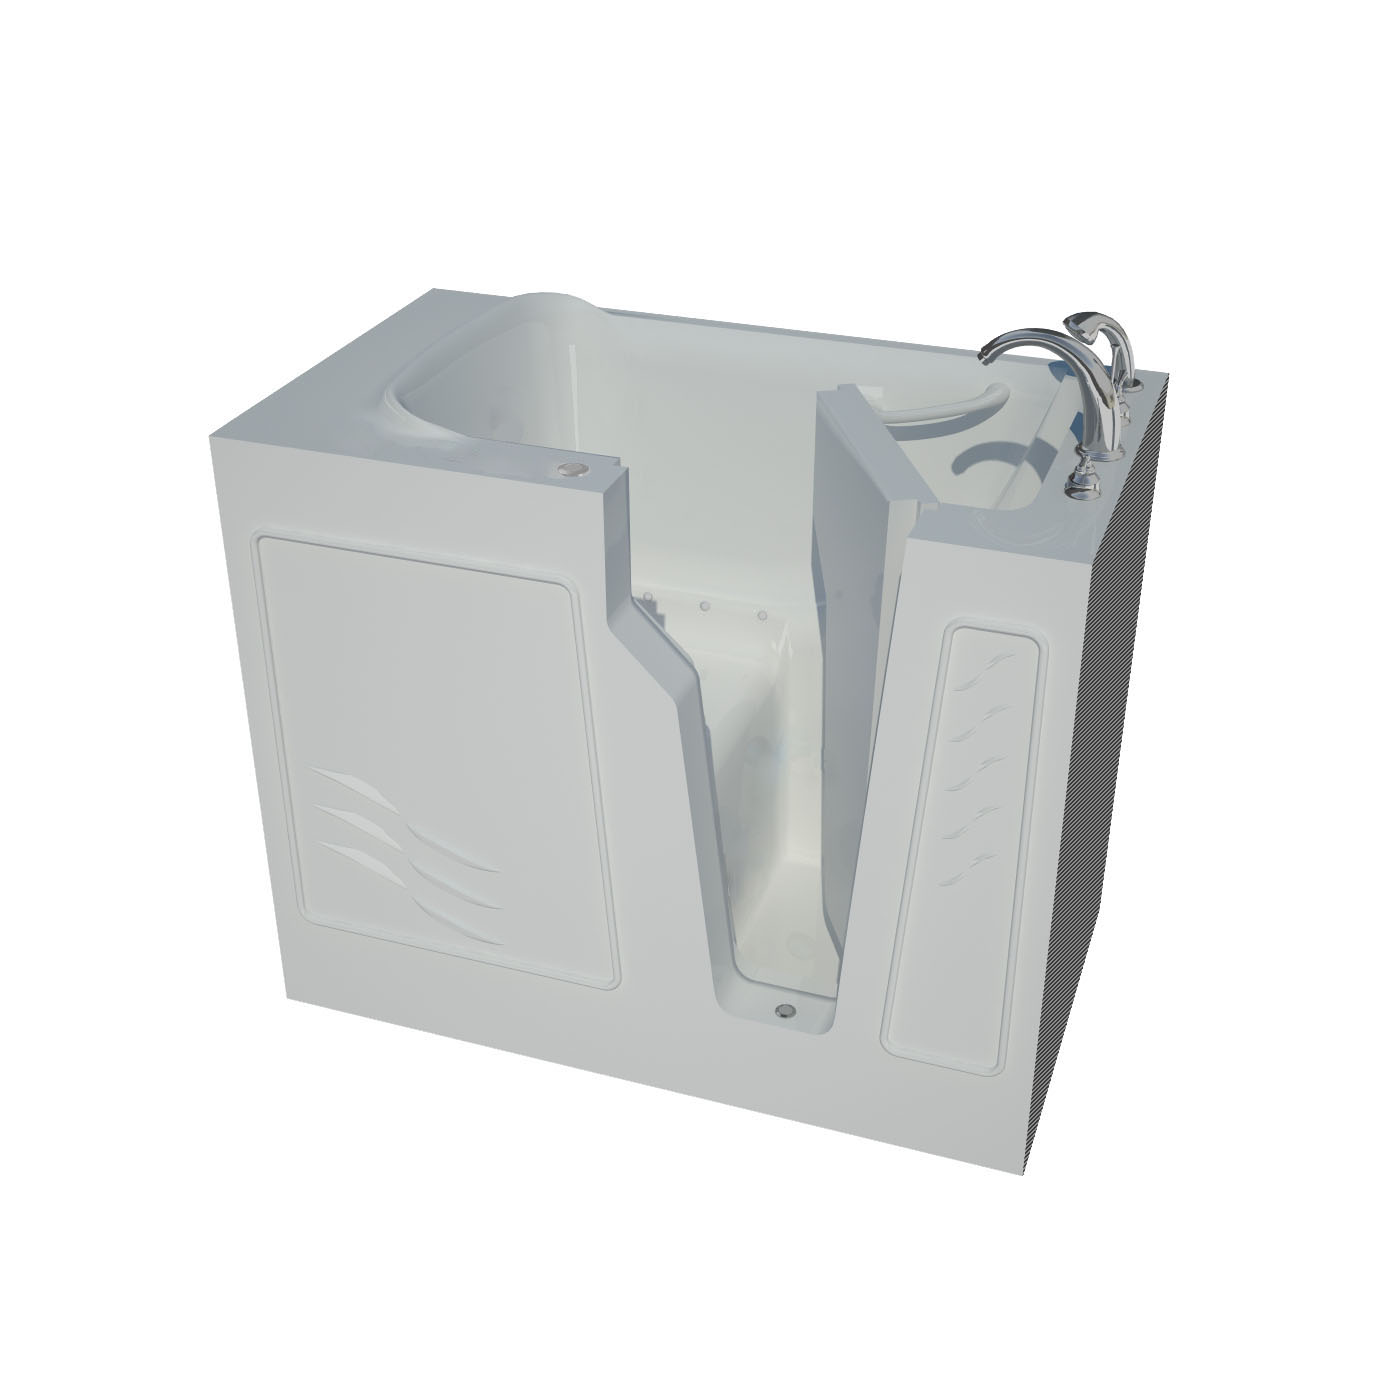 26 x 46 Right Drain Air Jetted Walk-In Bathtub in White